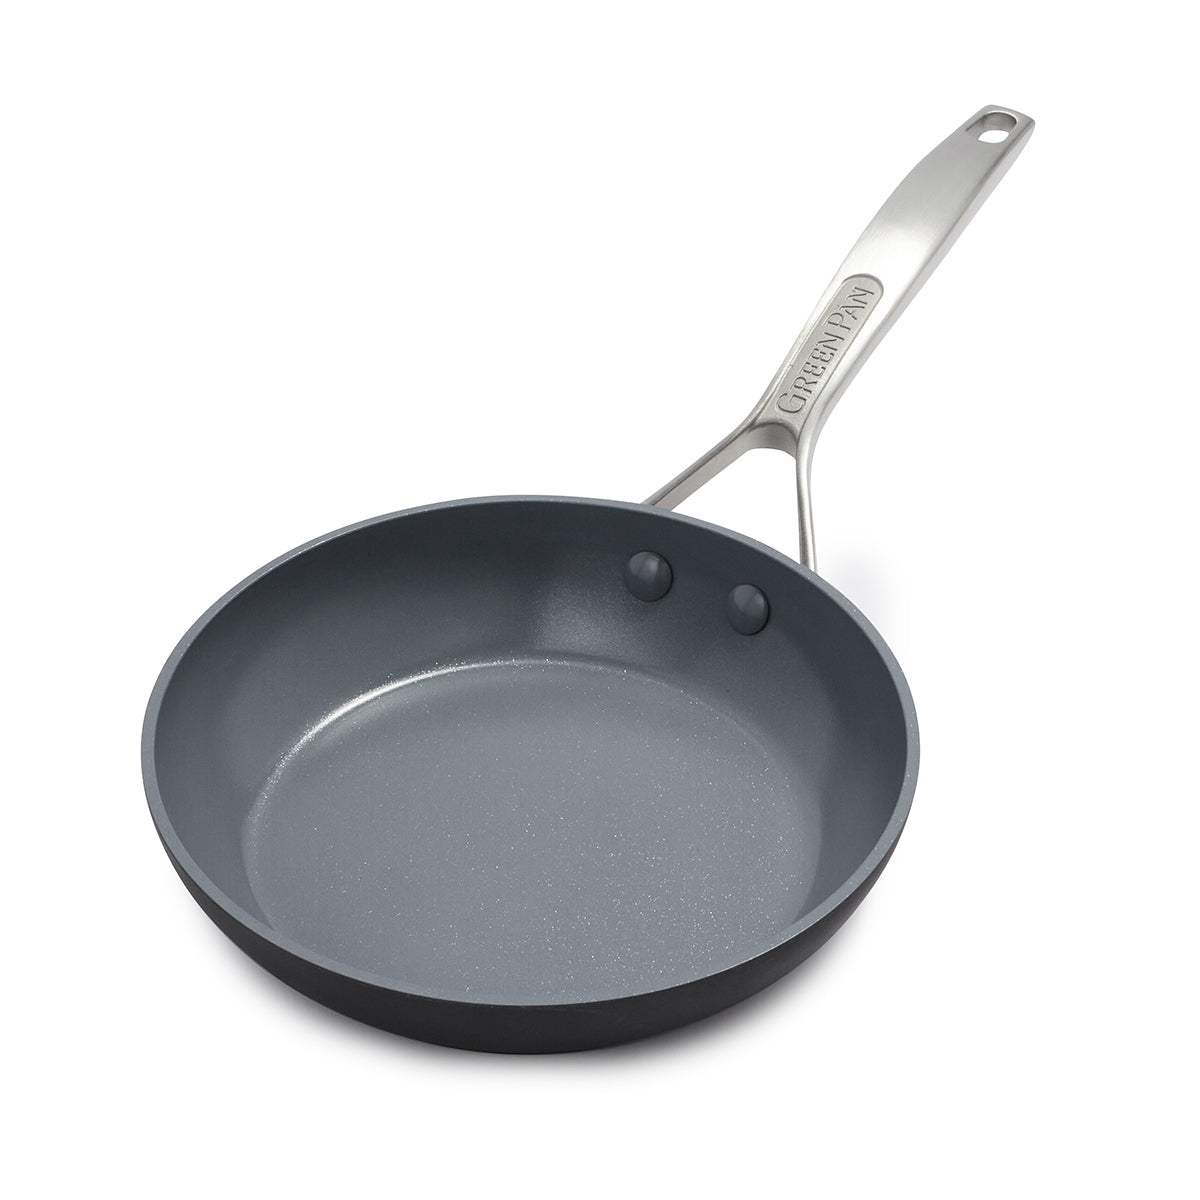 In-Depth Product Review: Green Pan Hard Anodized Non-Stick Ceramic Covered  Fry Pan (also known as Lima, Paris, Original Greenpan, Green+Life, and  GreenLife)